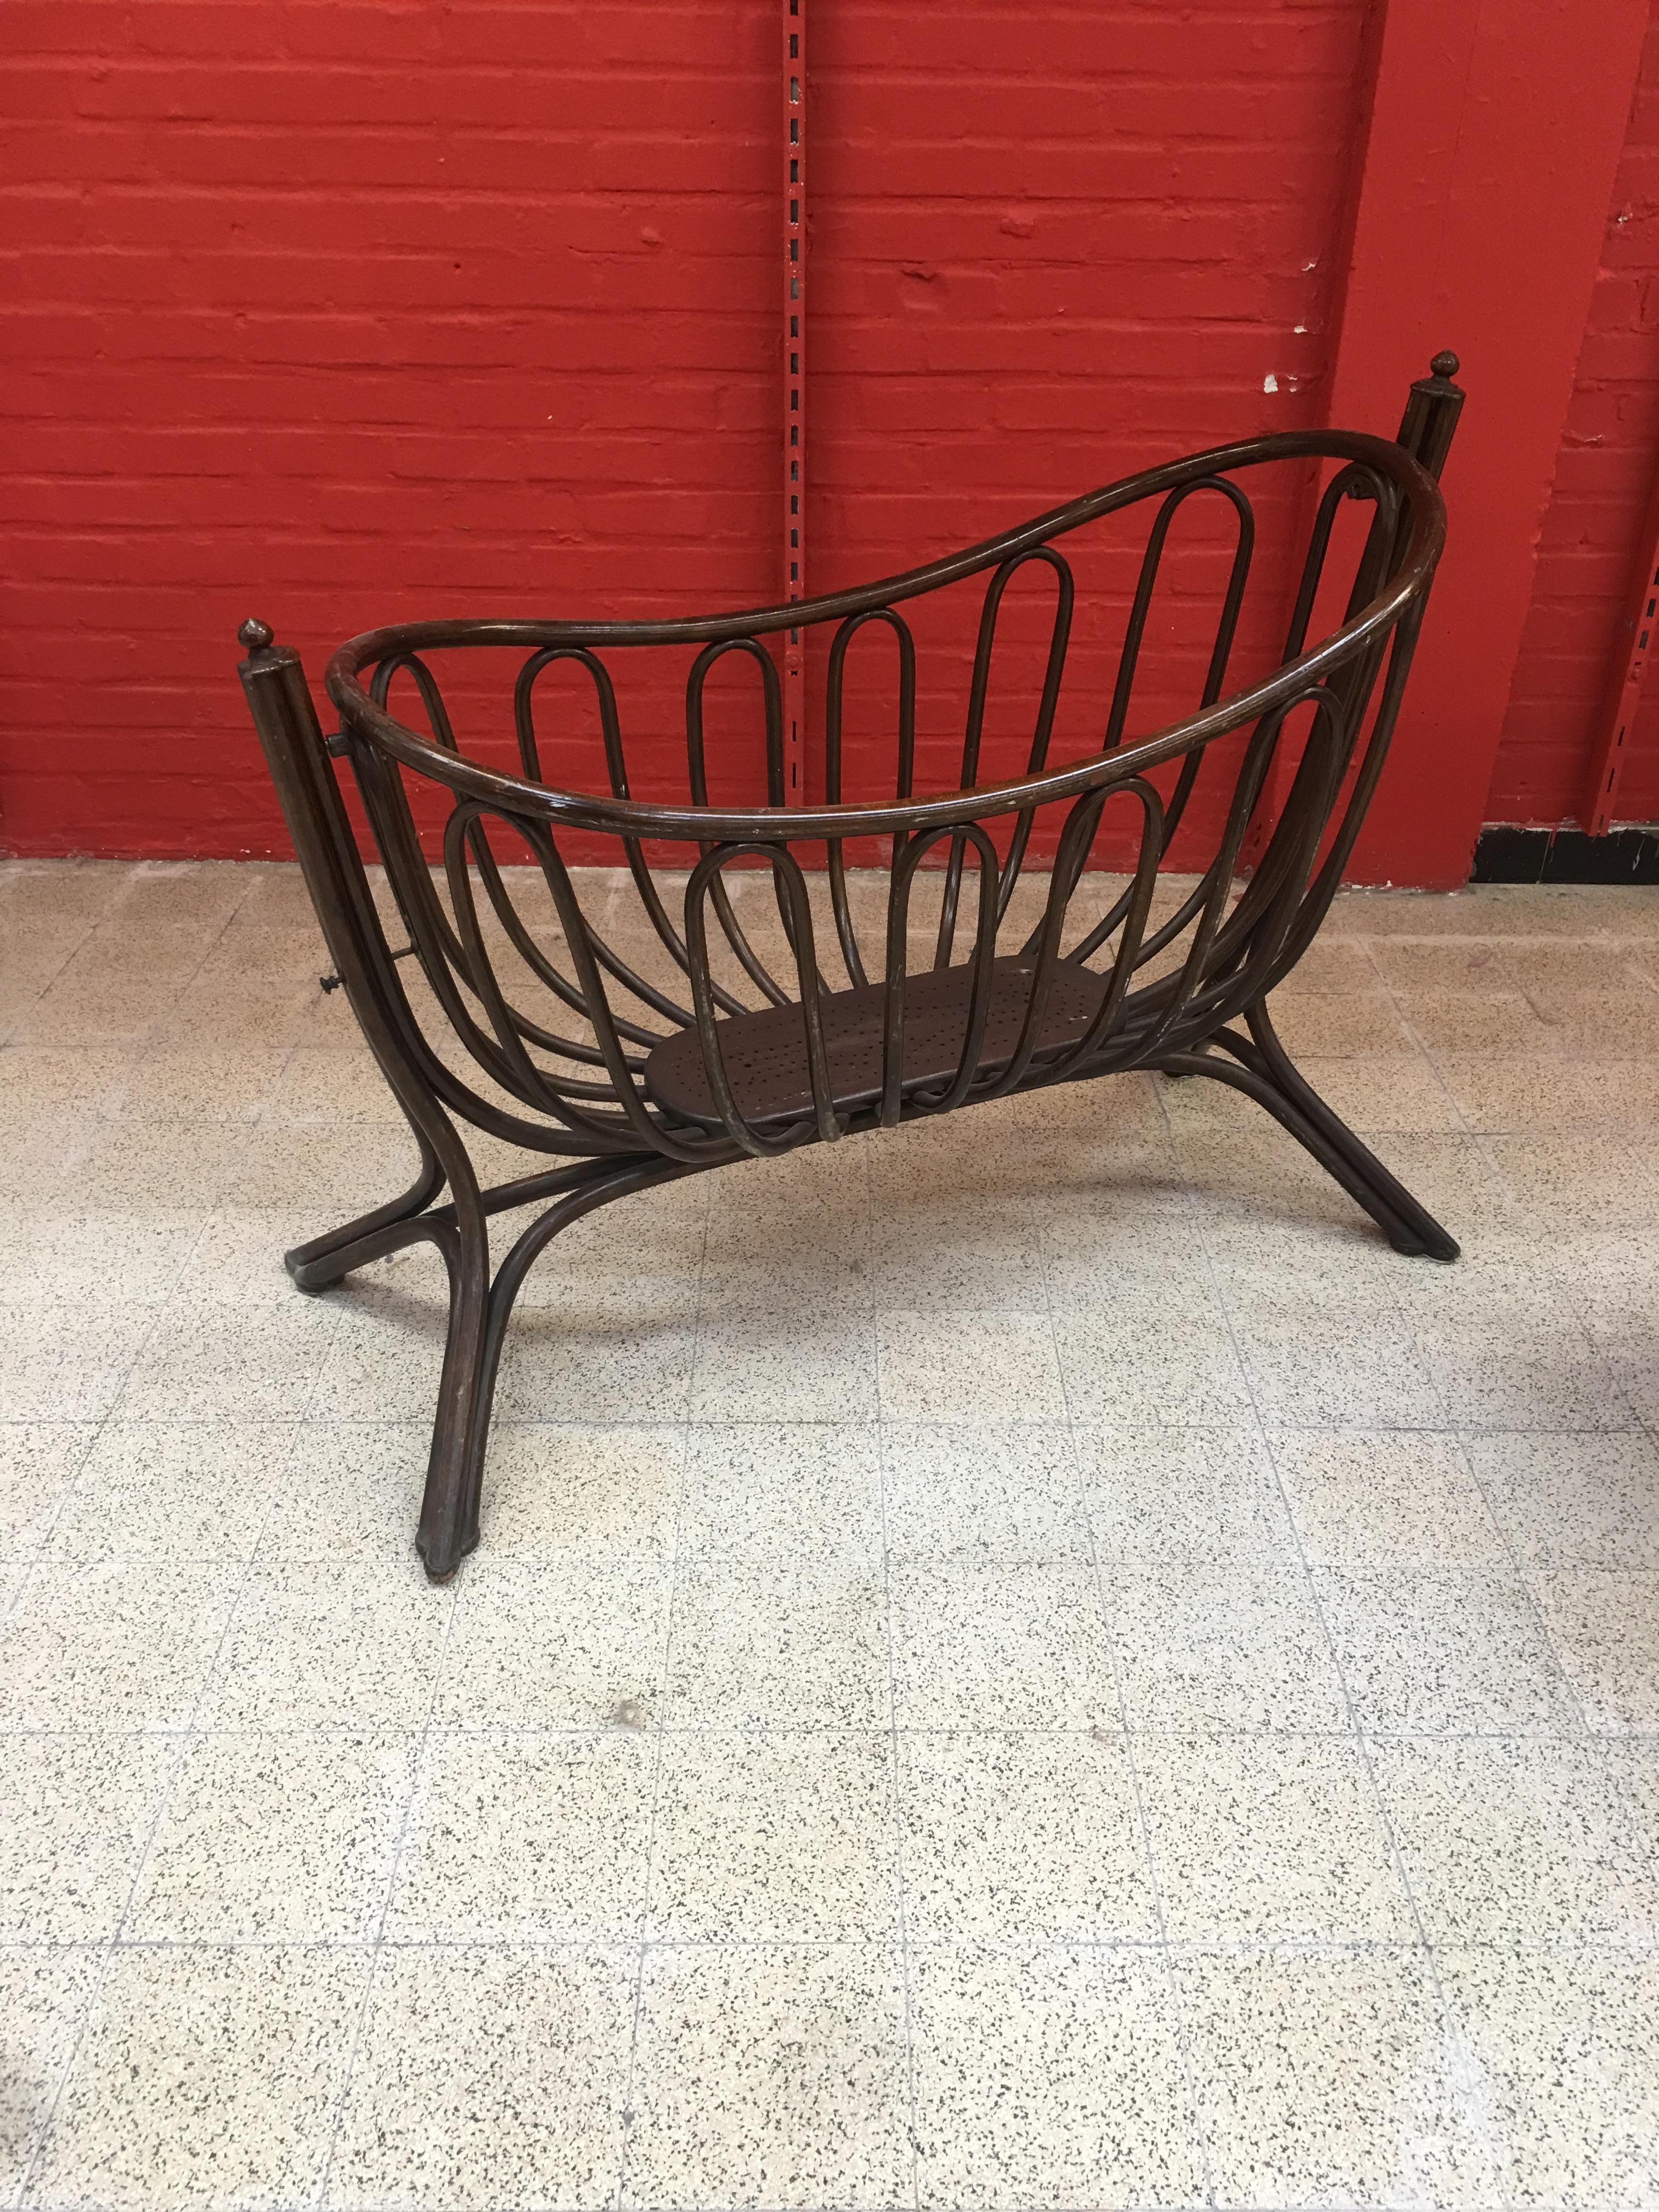 Cradle for baby Art Nouveau bentwood attributed to Thonet, circa 1900
Trace of label.